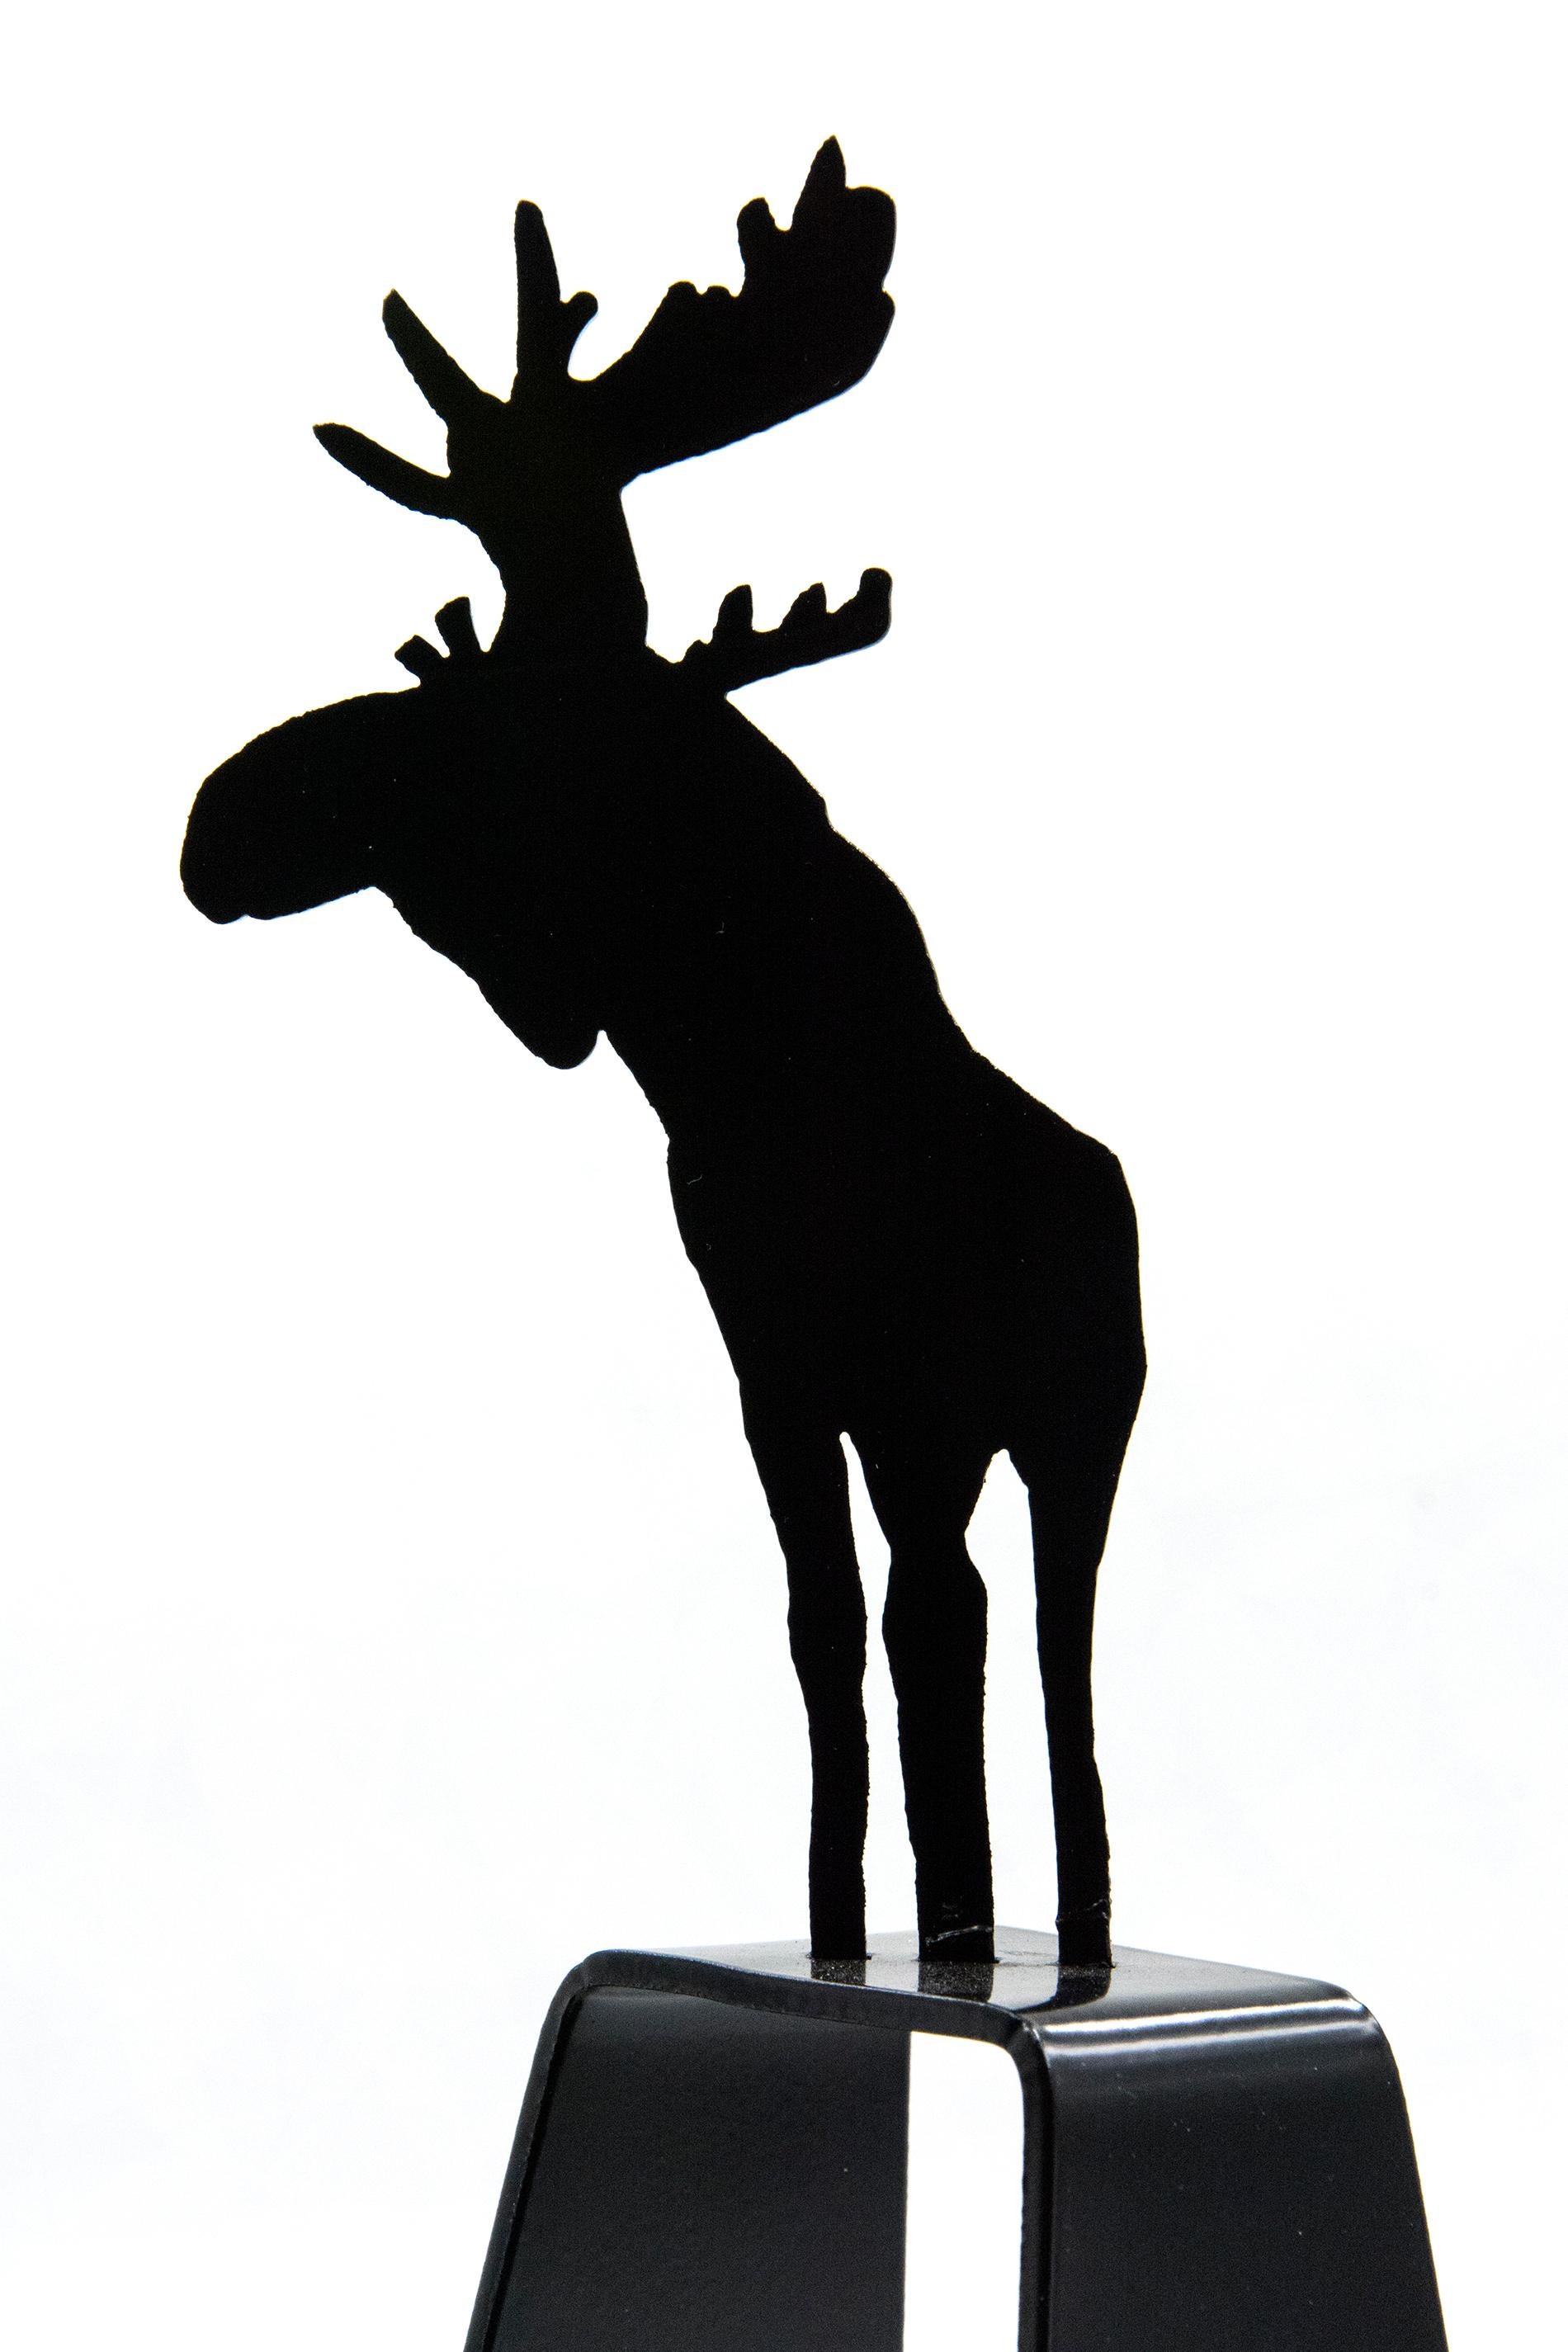 The unmistakable silhouette of a moose—one of Canada’s iconic images is celebrated in this sculpture by Charlie Pachter. As a little boy, pop artist Pachter once met a moose at a local fair. The memory of that encounter stayed with him and decades